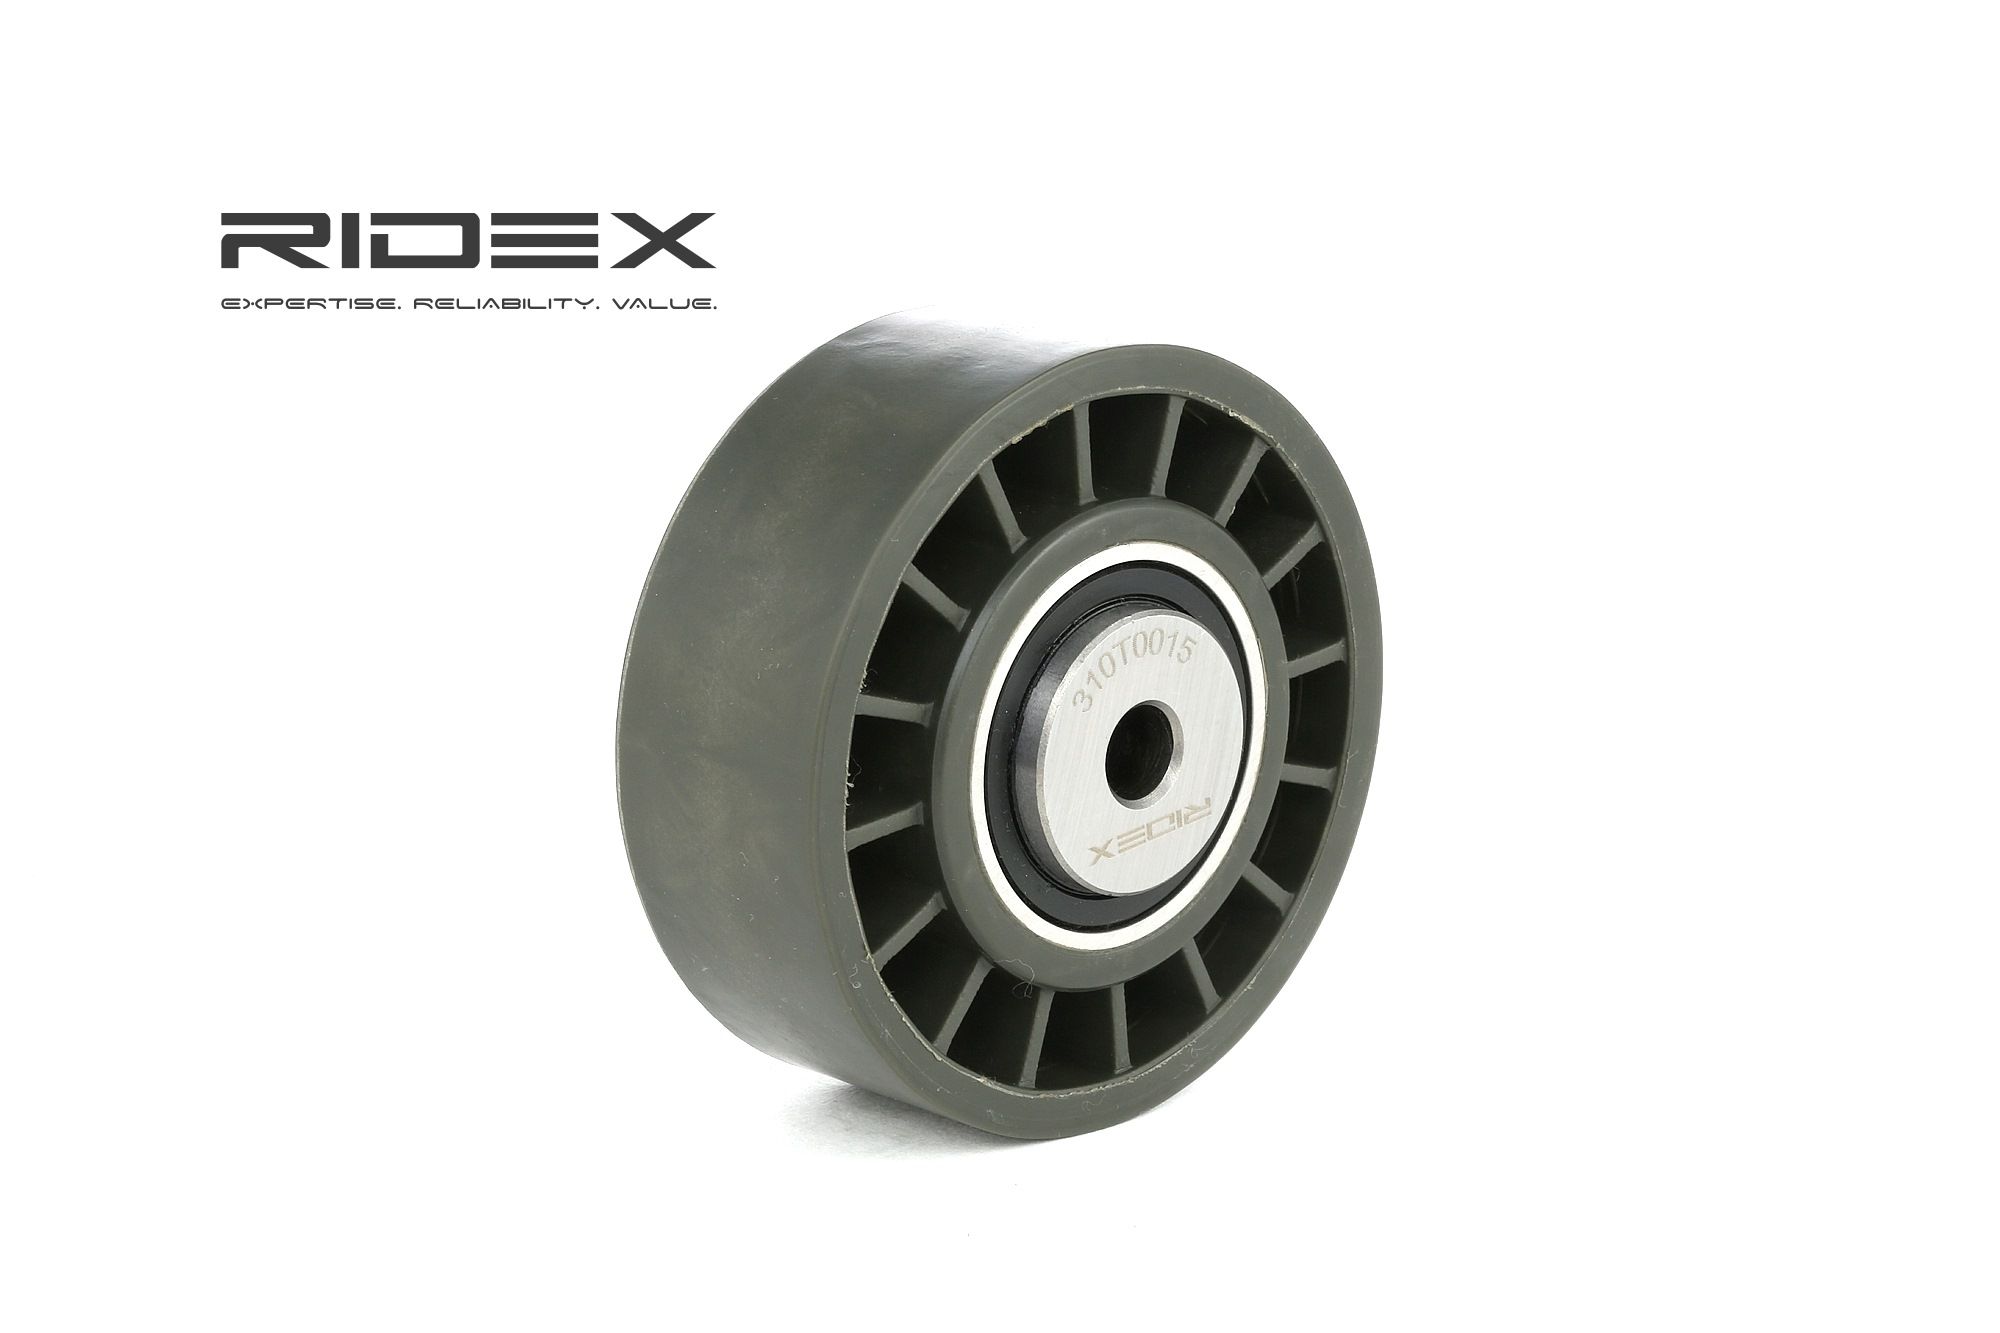 Mercedes E-Class Tensioner pulley, v-ribbed belt 8097650 RIDEX 310T0015 online buy